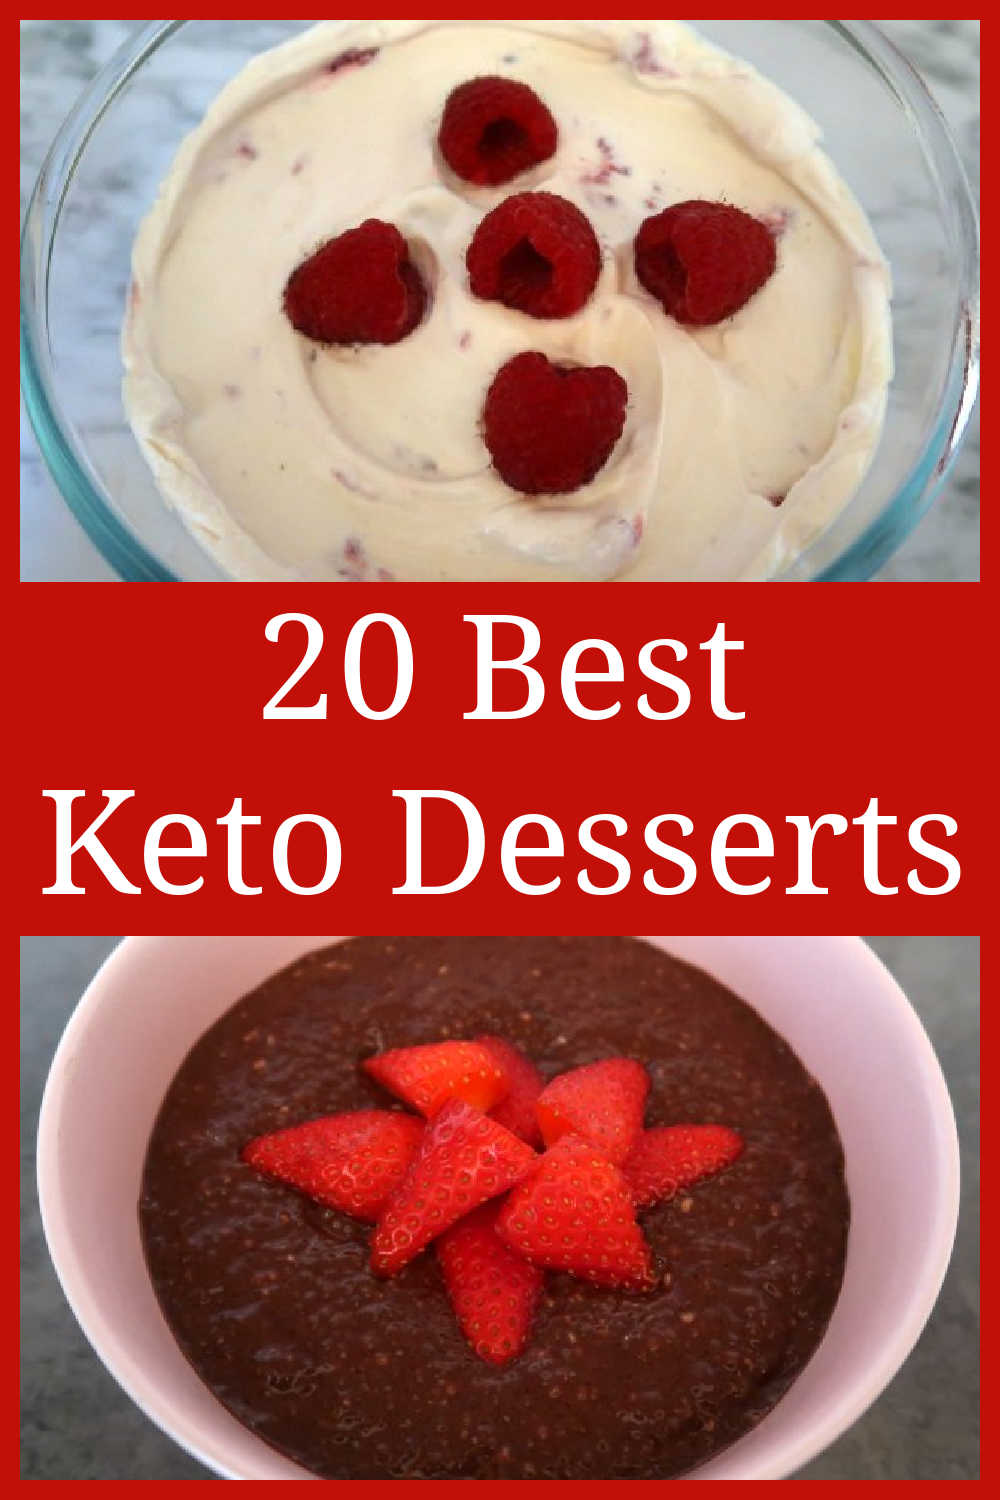 Best Keto Desserts Recipes - 20 Easy Low Carb Dessert Ideas that are quick to prepare and will satisfy your sweet tooth.